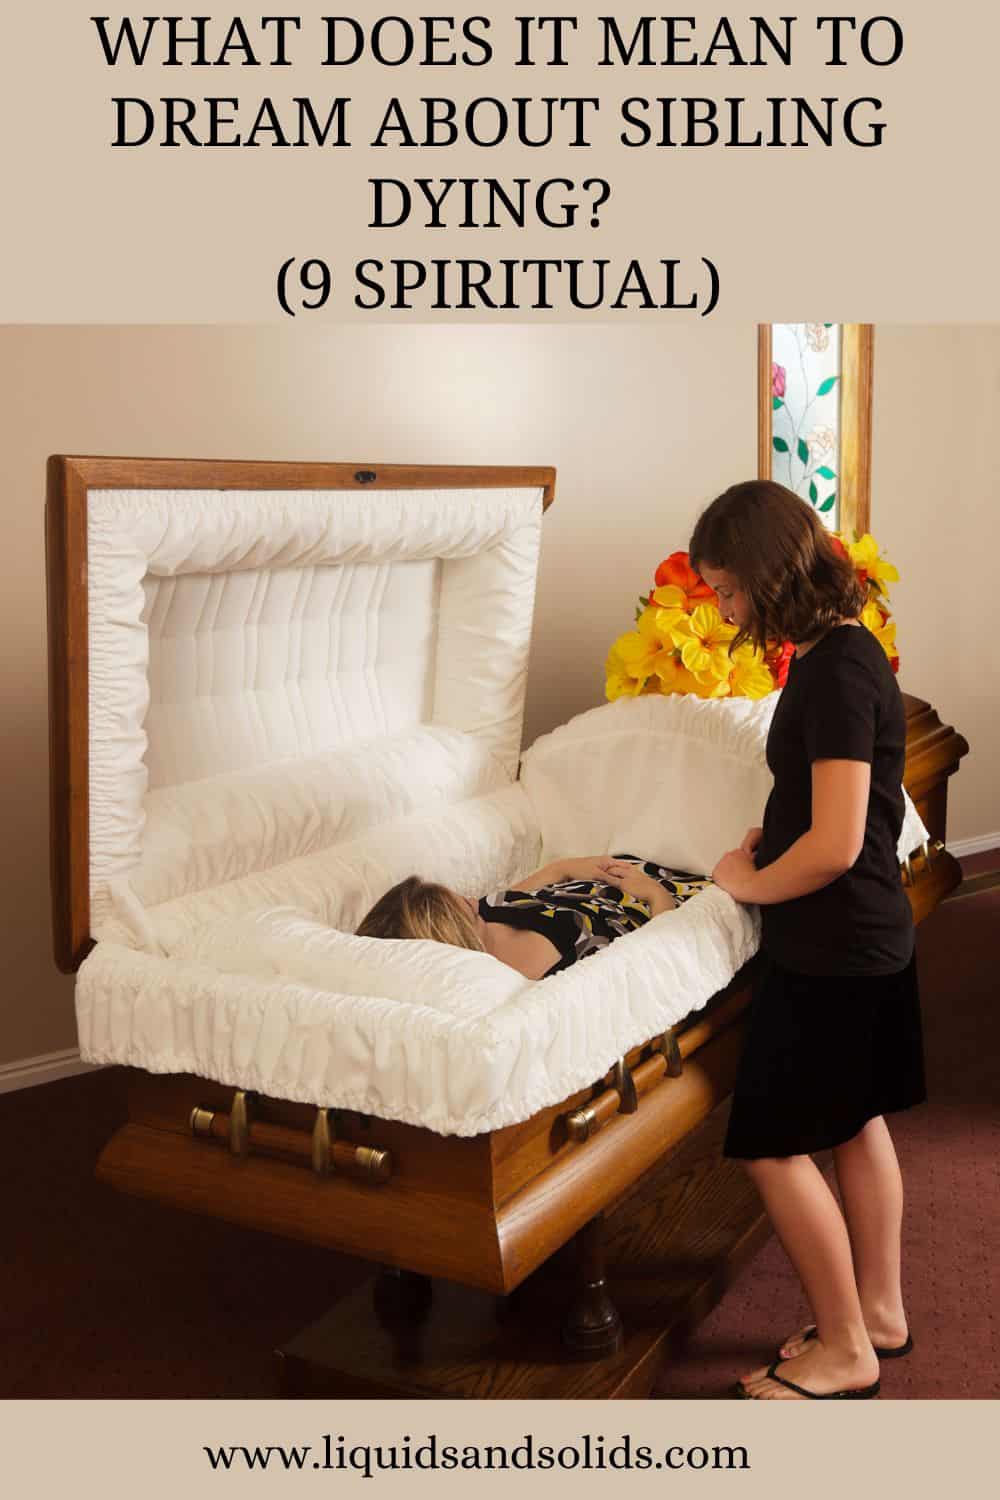 What Does It Mean To Dream About Sibling Dying? (9 Spiritual)